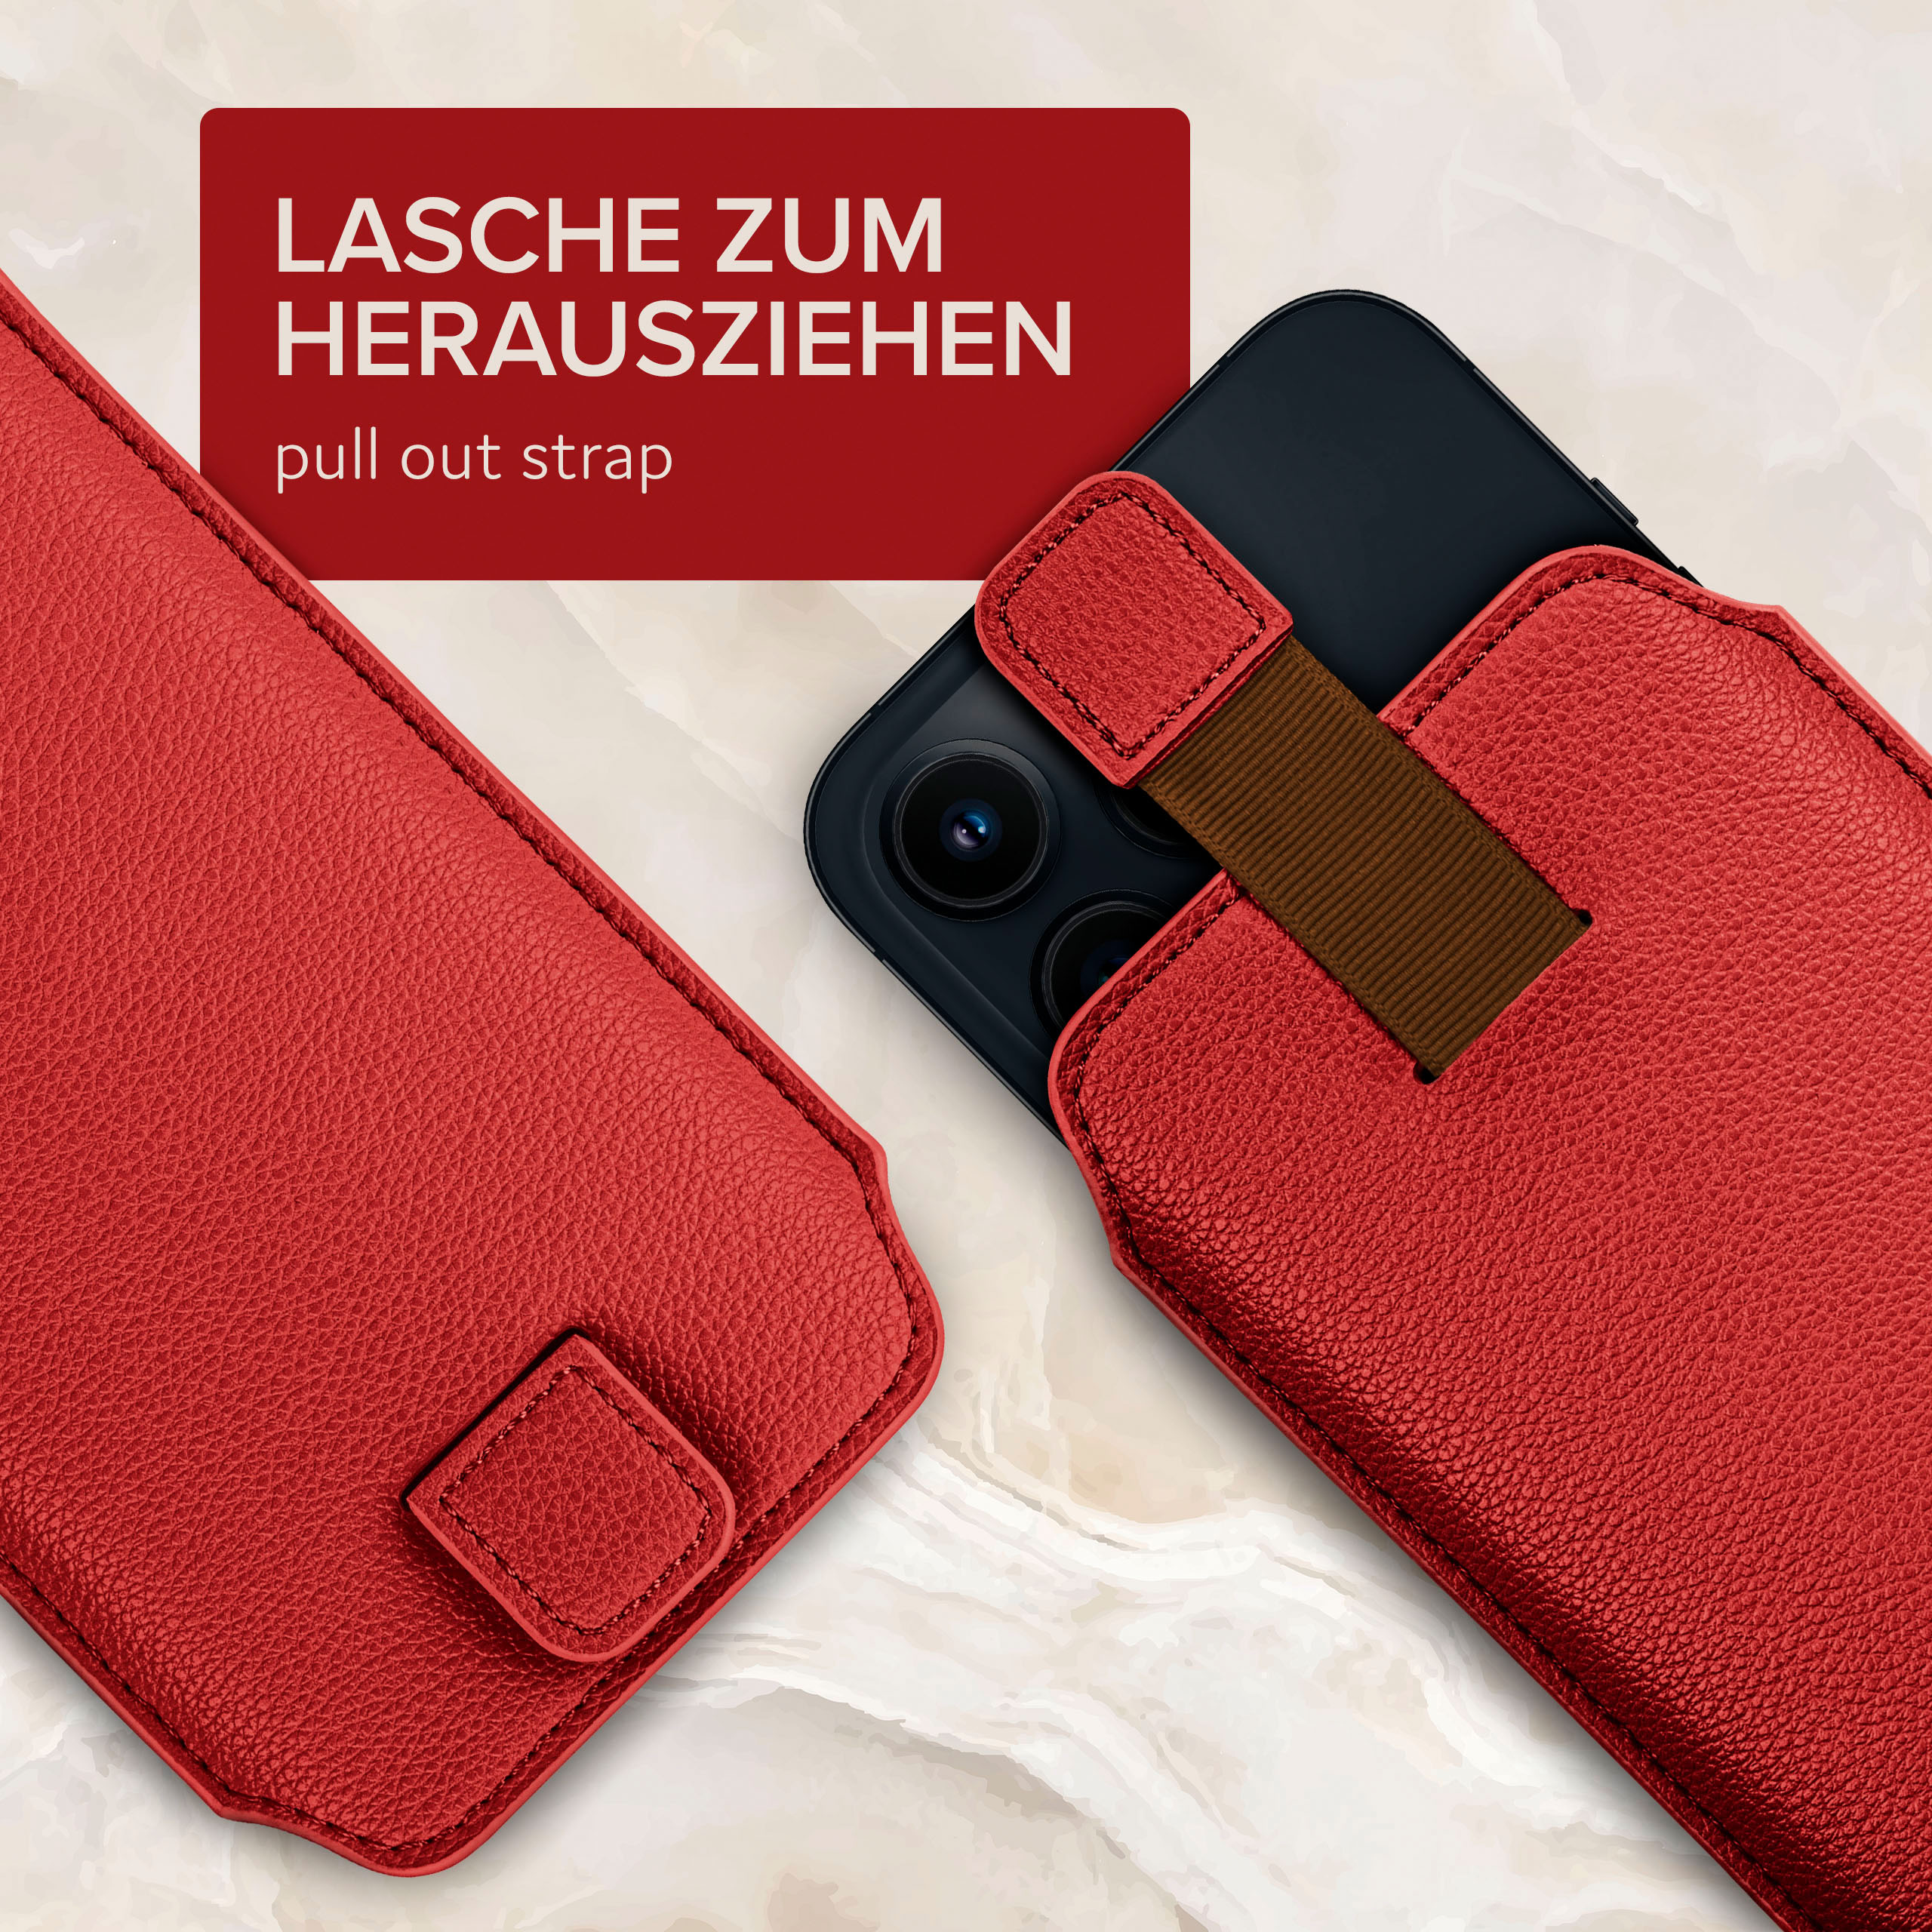 Xperia Cover, Einsteckhülle Full Sony, Zuglasche, Dunkelrot ONEFLOW mit Compact, Z5